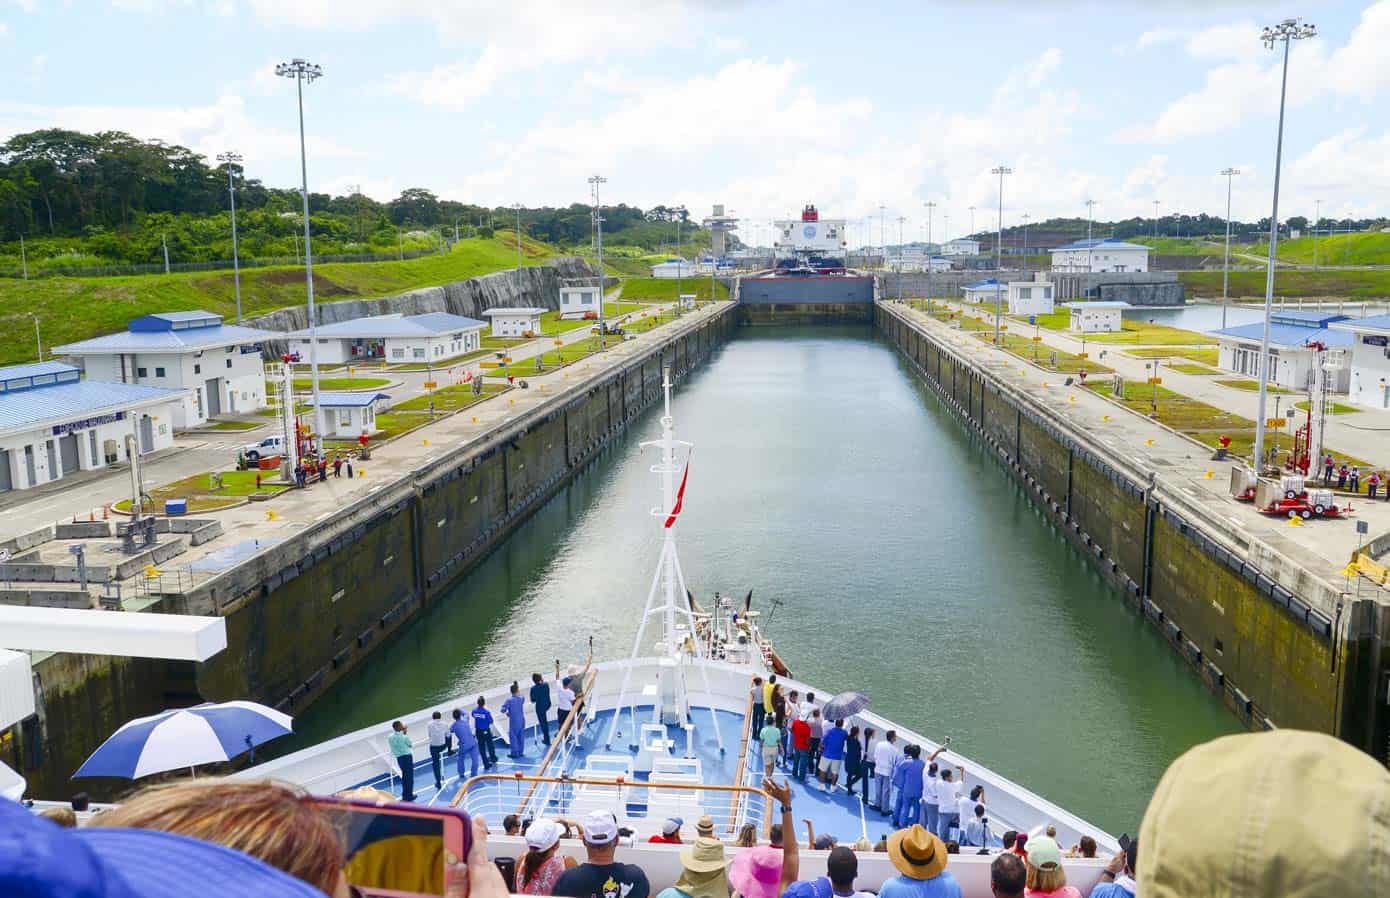 Experiencing a Panama Canal crossing on board cruise ship.